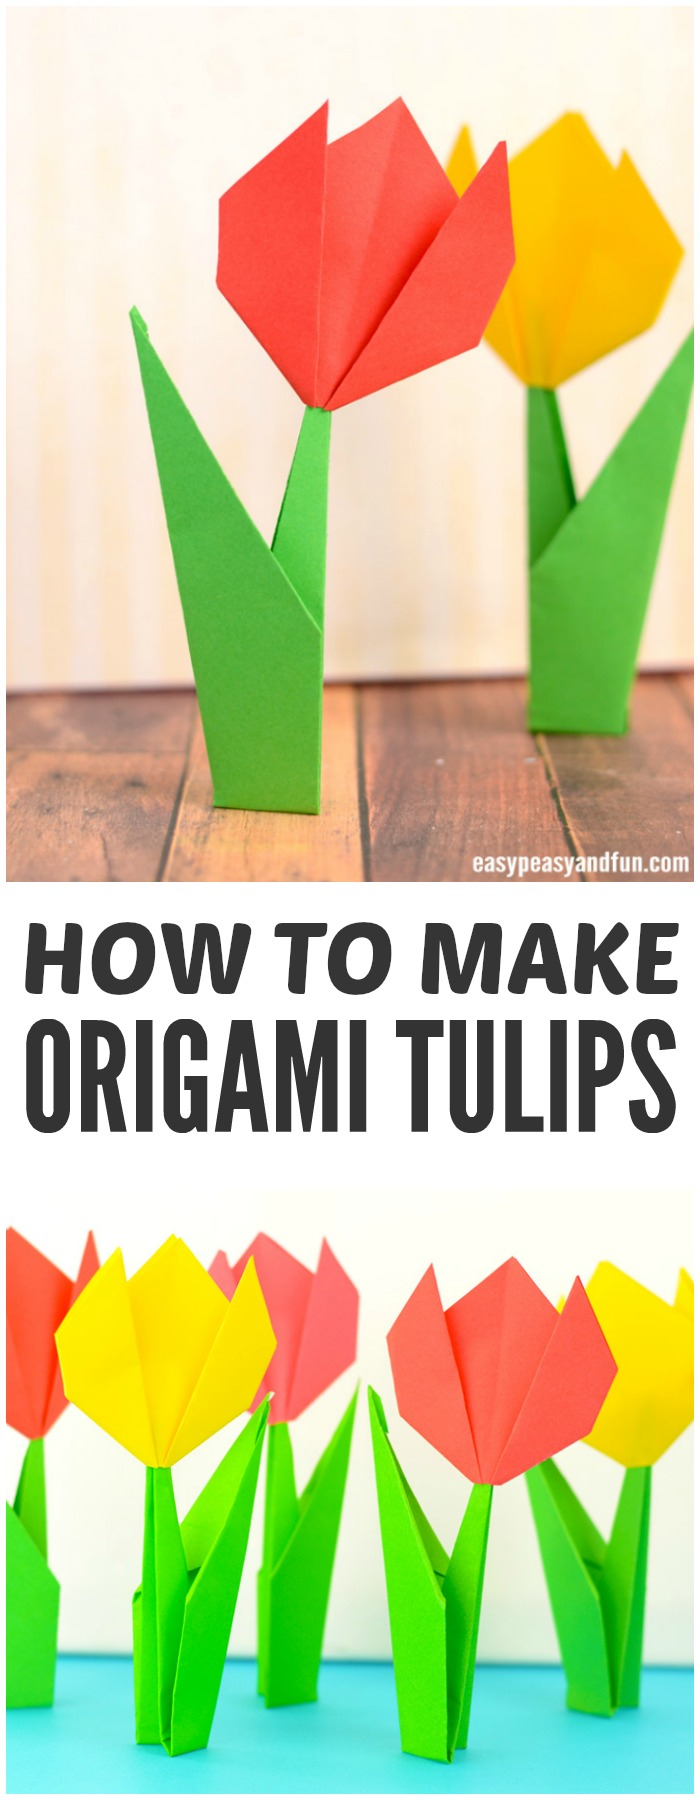 How To Make A Flower Origami Step By Step How To Make Origami Flowers Origami Tulip Tutorial With Diagram